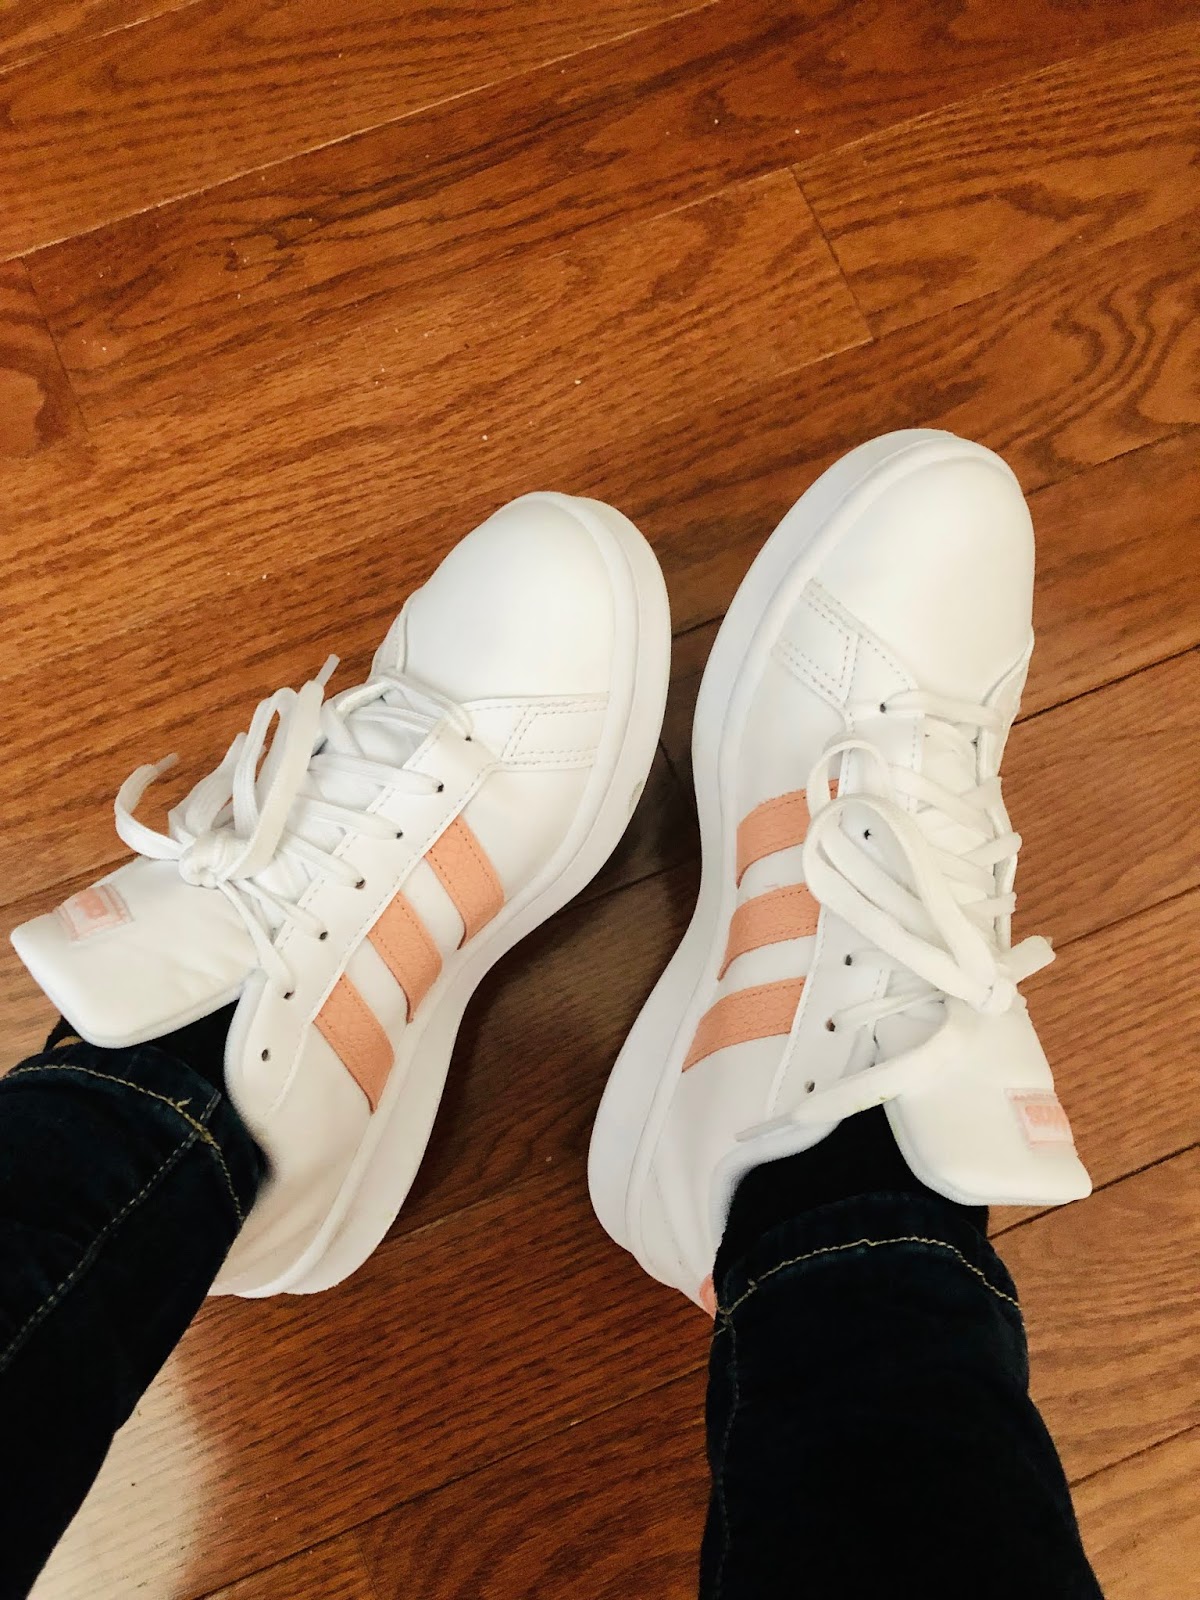 adidas white shoes with pink stripes